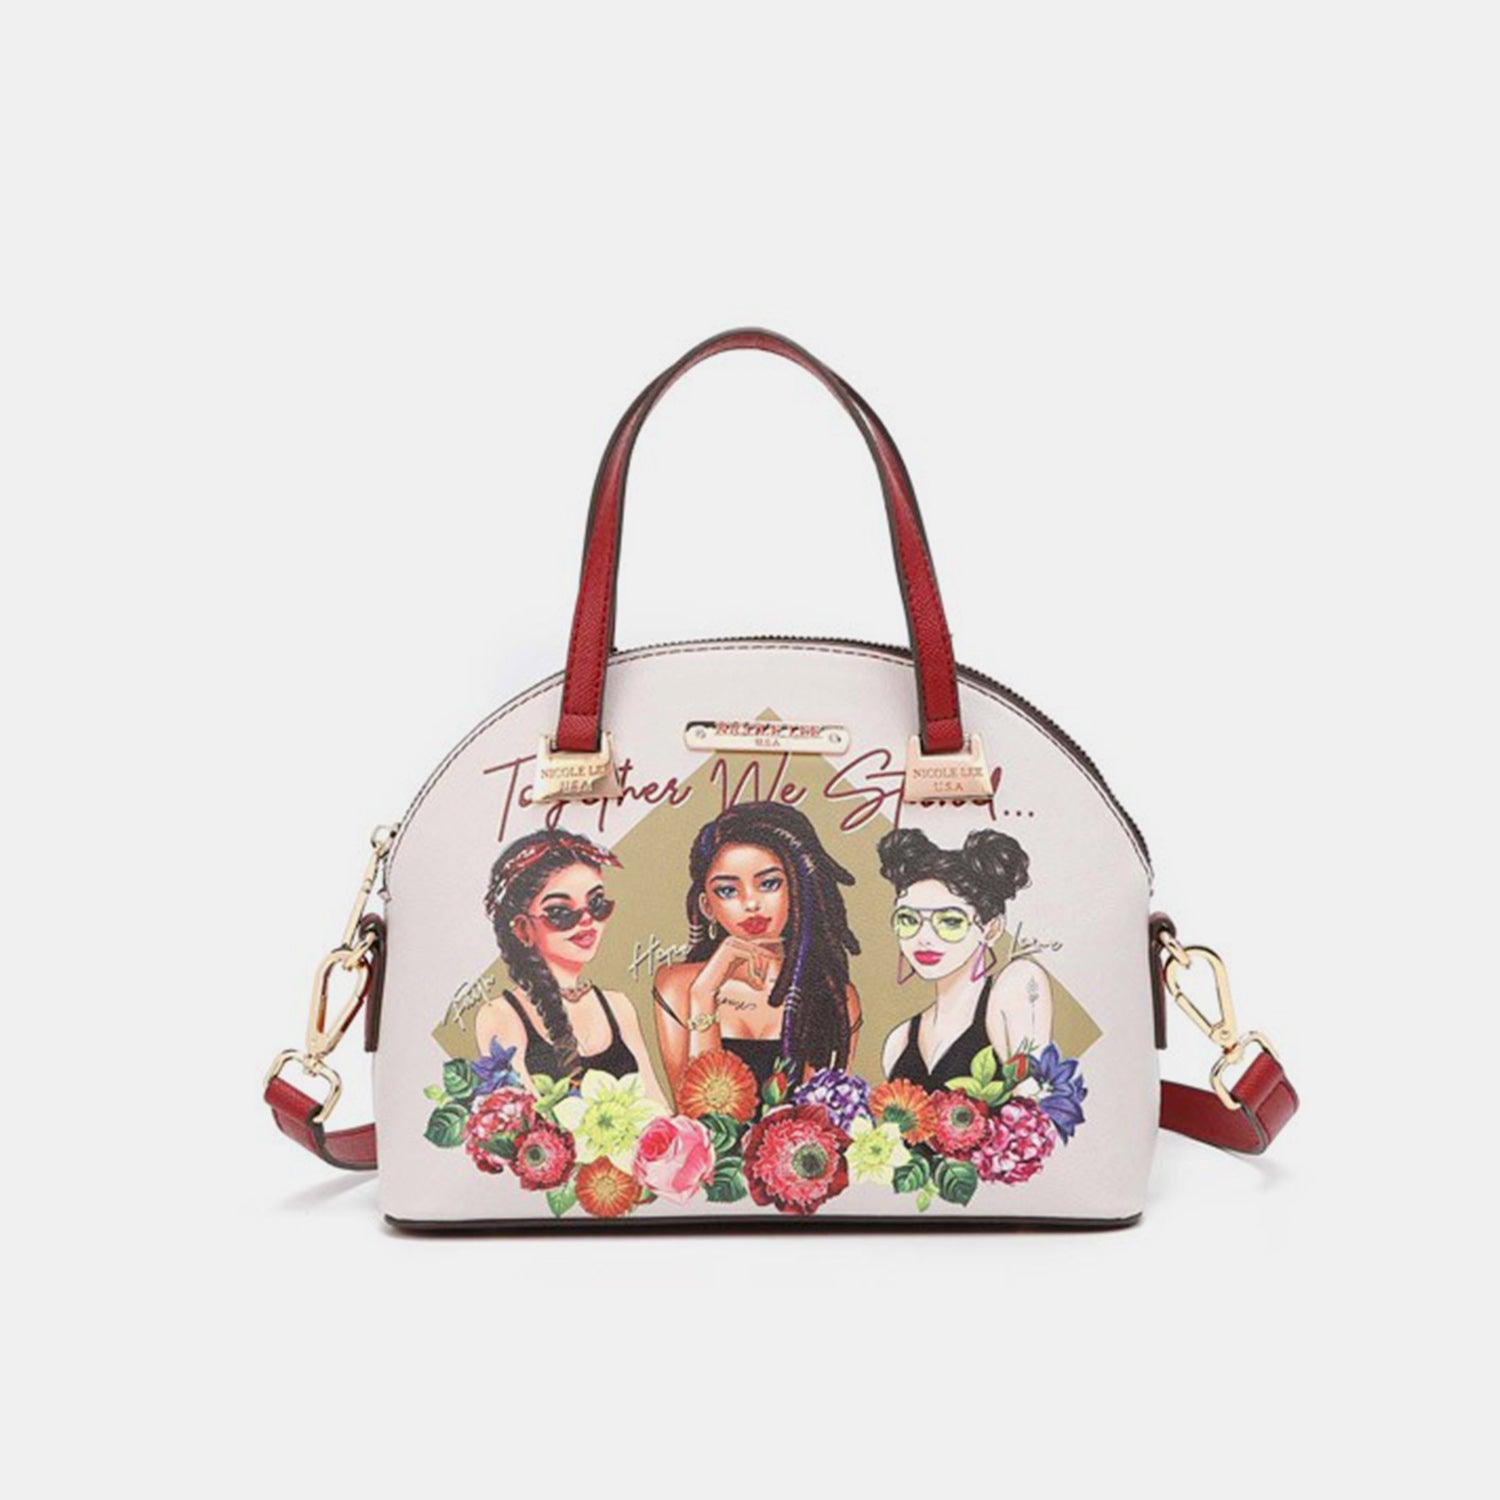 a handbag with a picture of two women on it